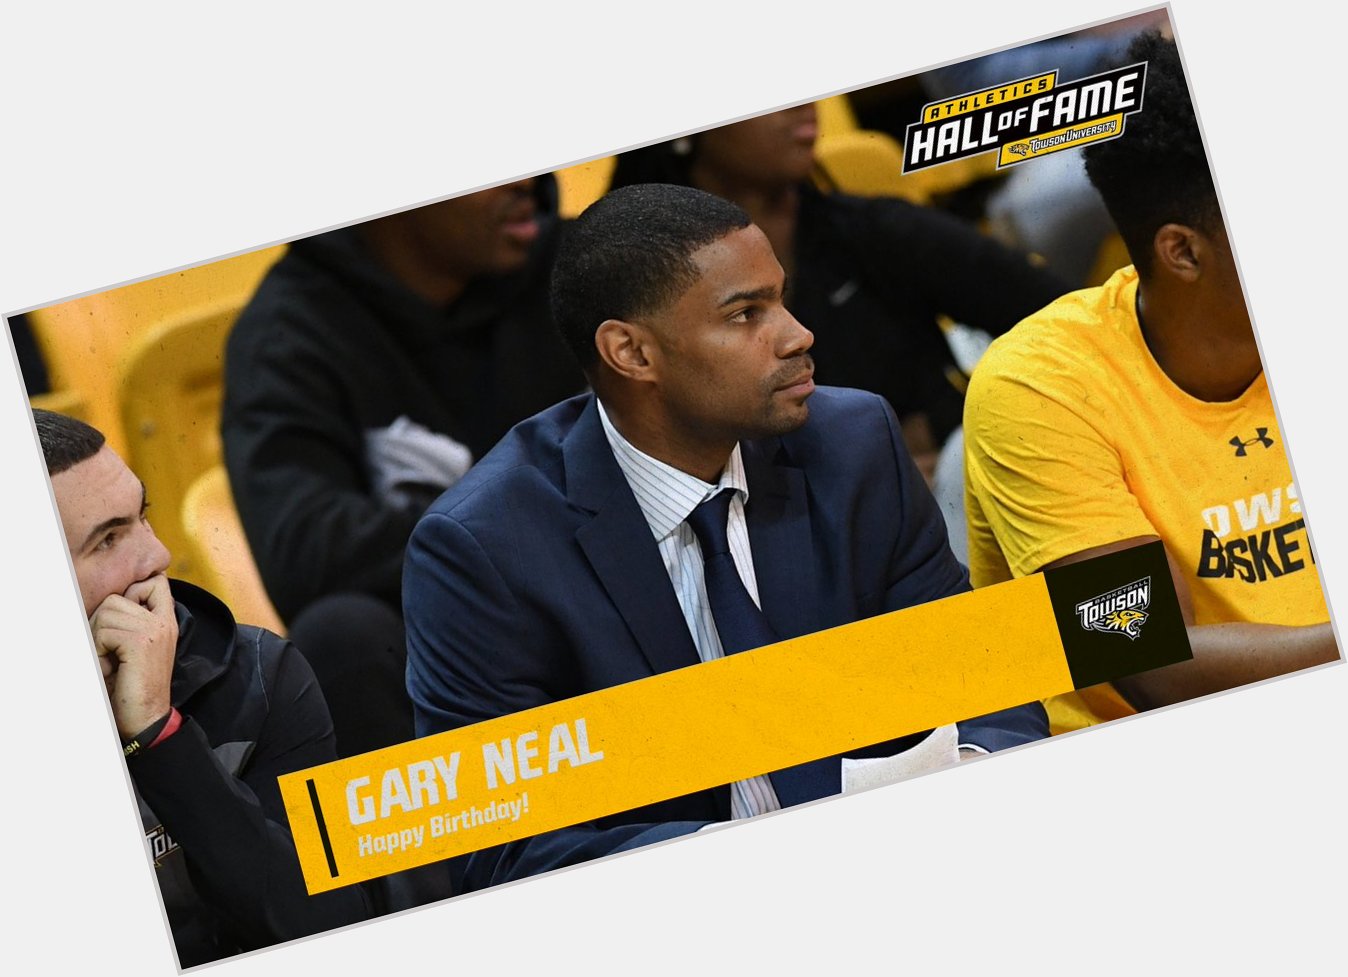 Happy birthday to graduate manager and Towson Athletics Hall of Fame member Gary Neal! 